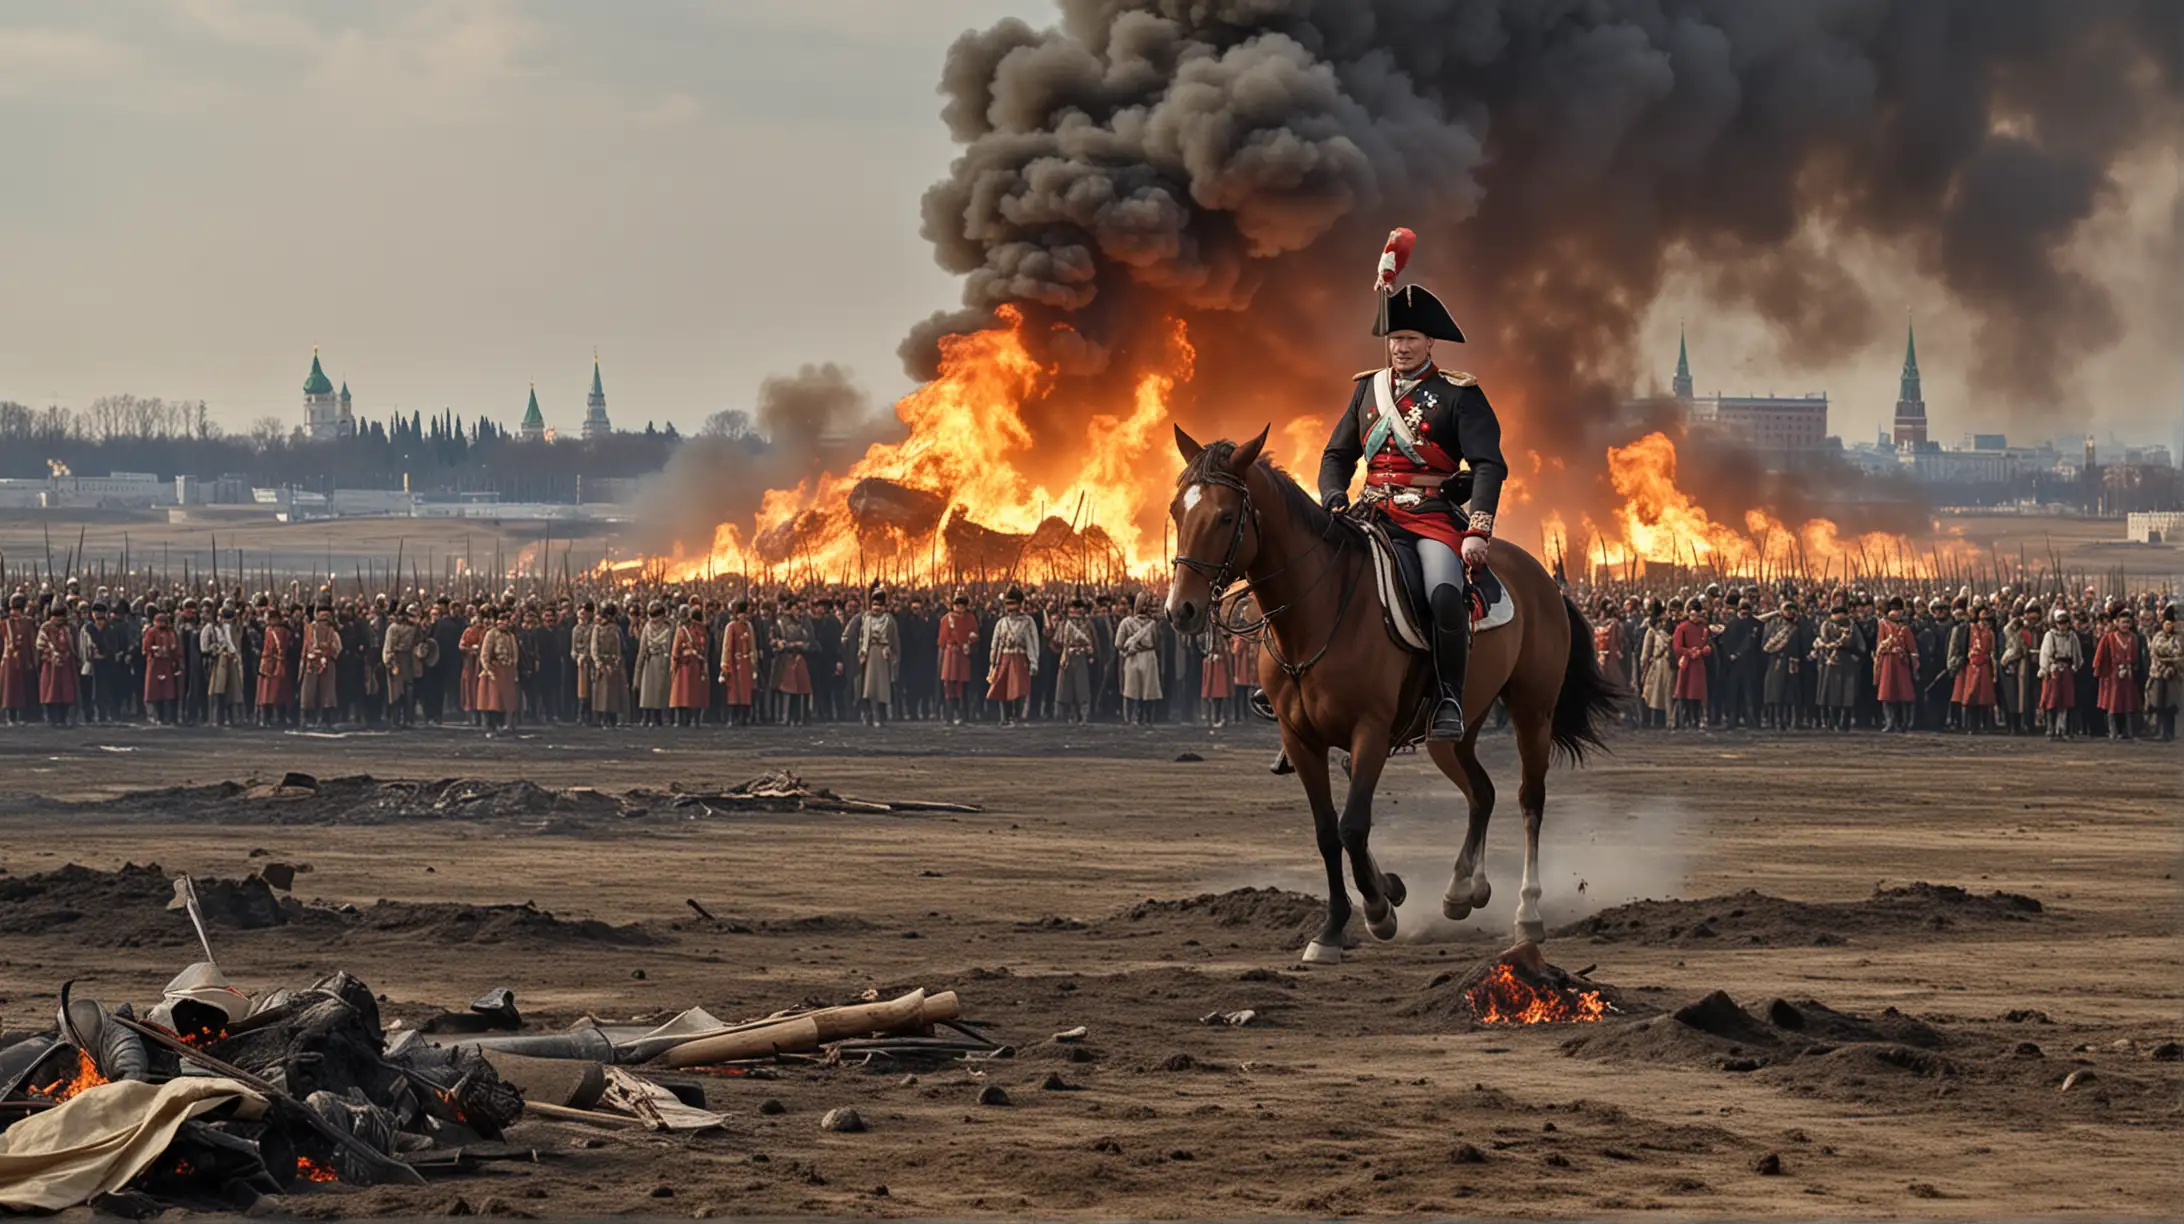 Vladimir Putin with napoleon's hat on a horse impersonating Napoleon's Retreat From moscou from German painter Adolph Northen with the Kremlin burning in the background THE field is  littered with thousand DEAD corpses around him